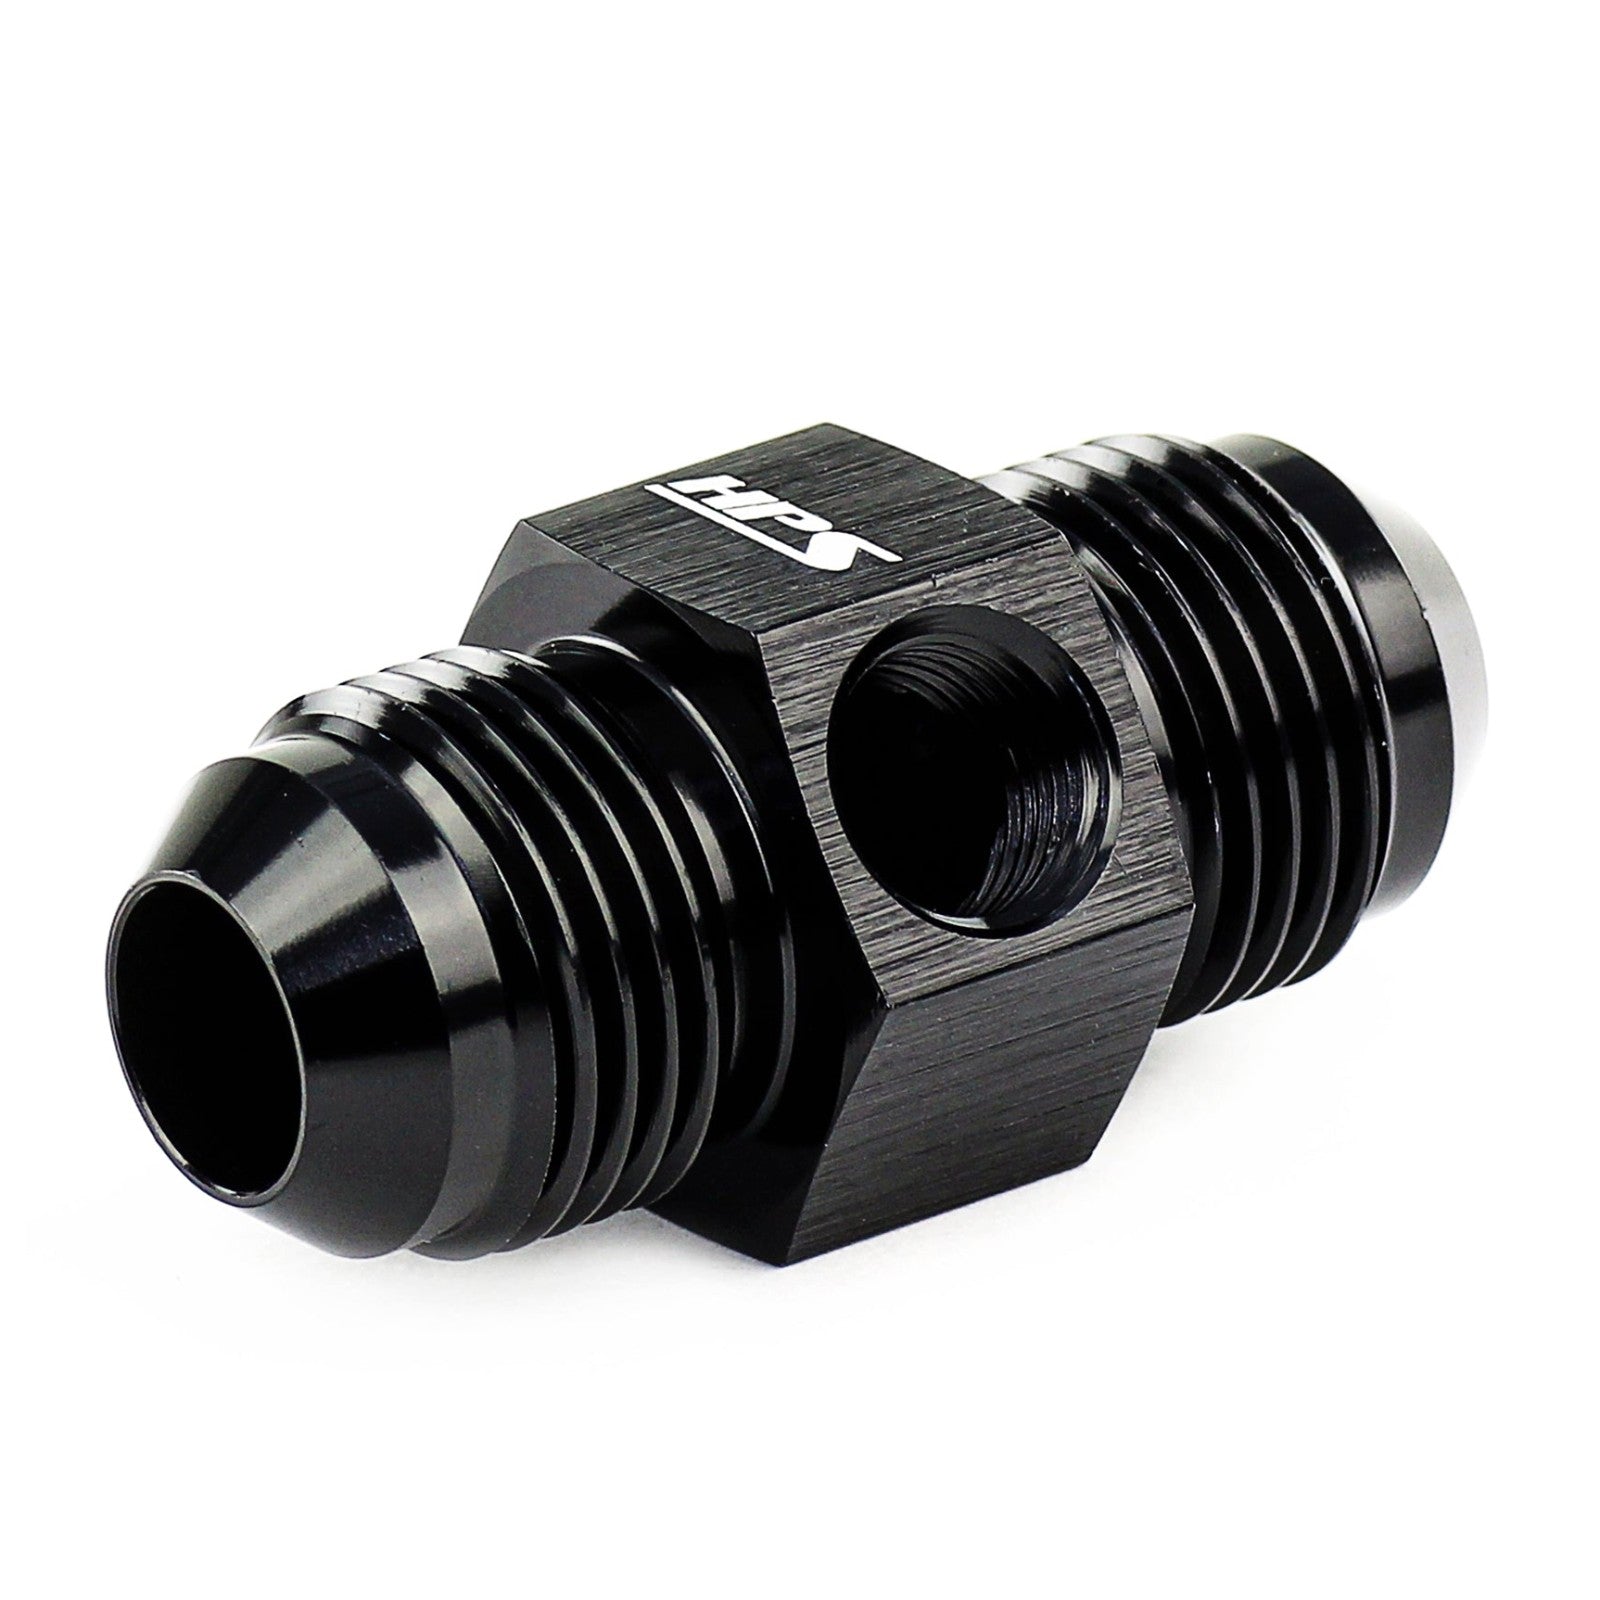 HPS AN Male to Male NPT Adapter (Side Port) Fitting [Tee] [AN -12] (Aluminum, Black)